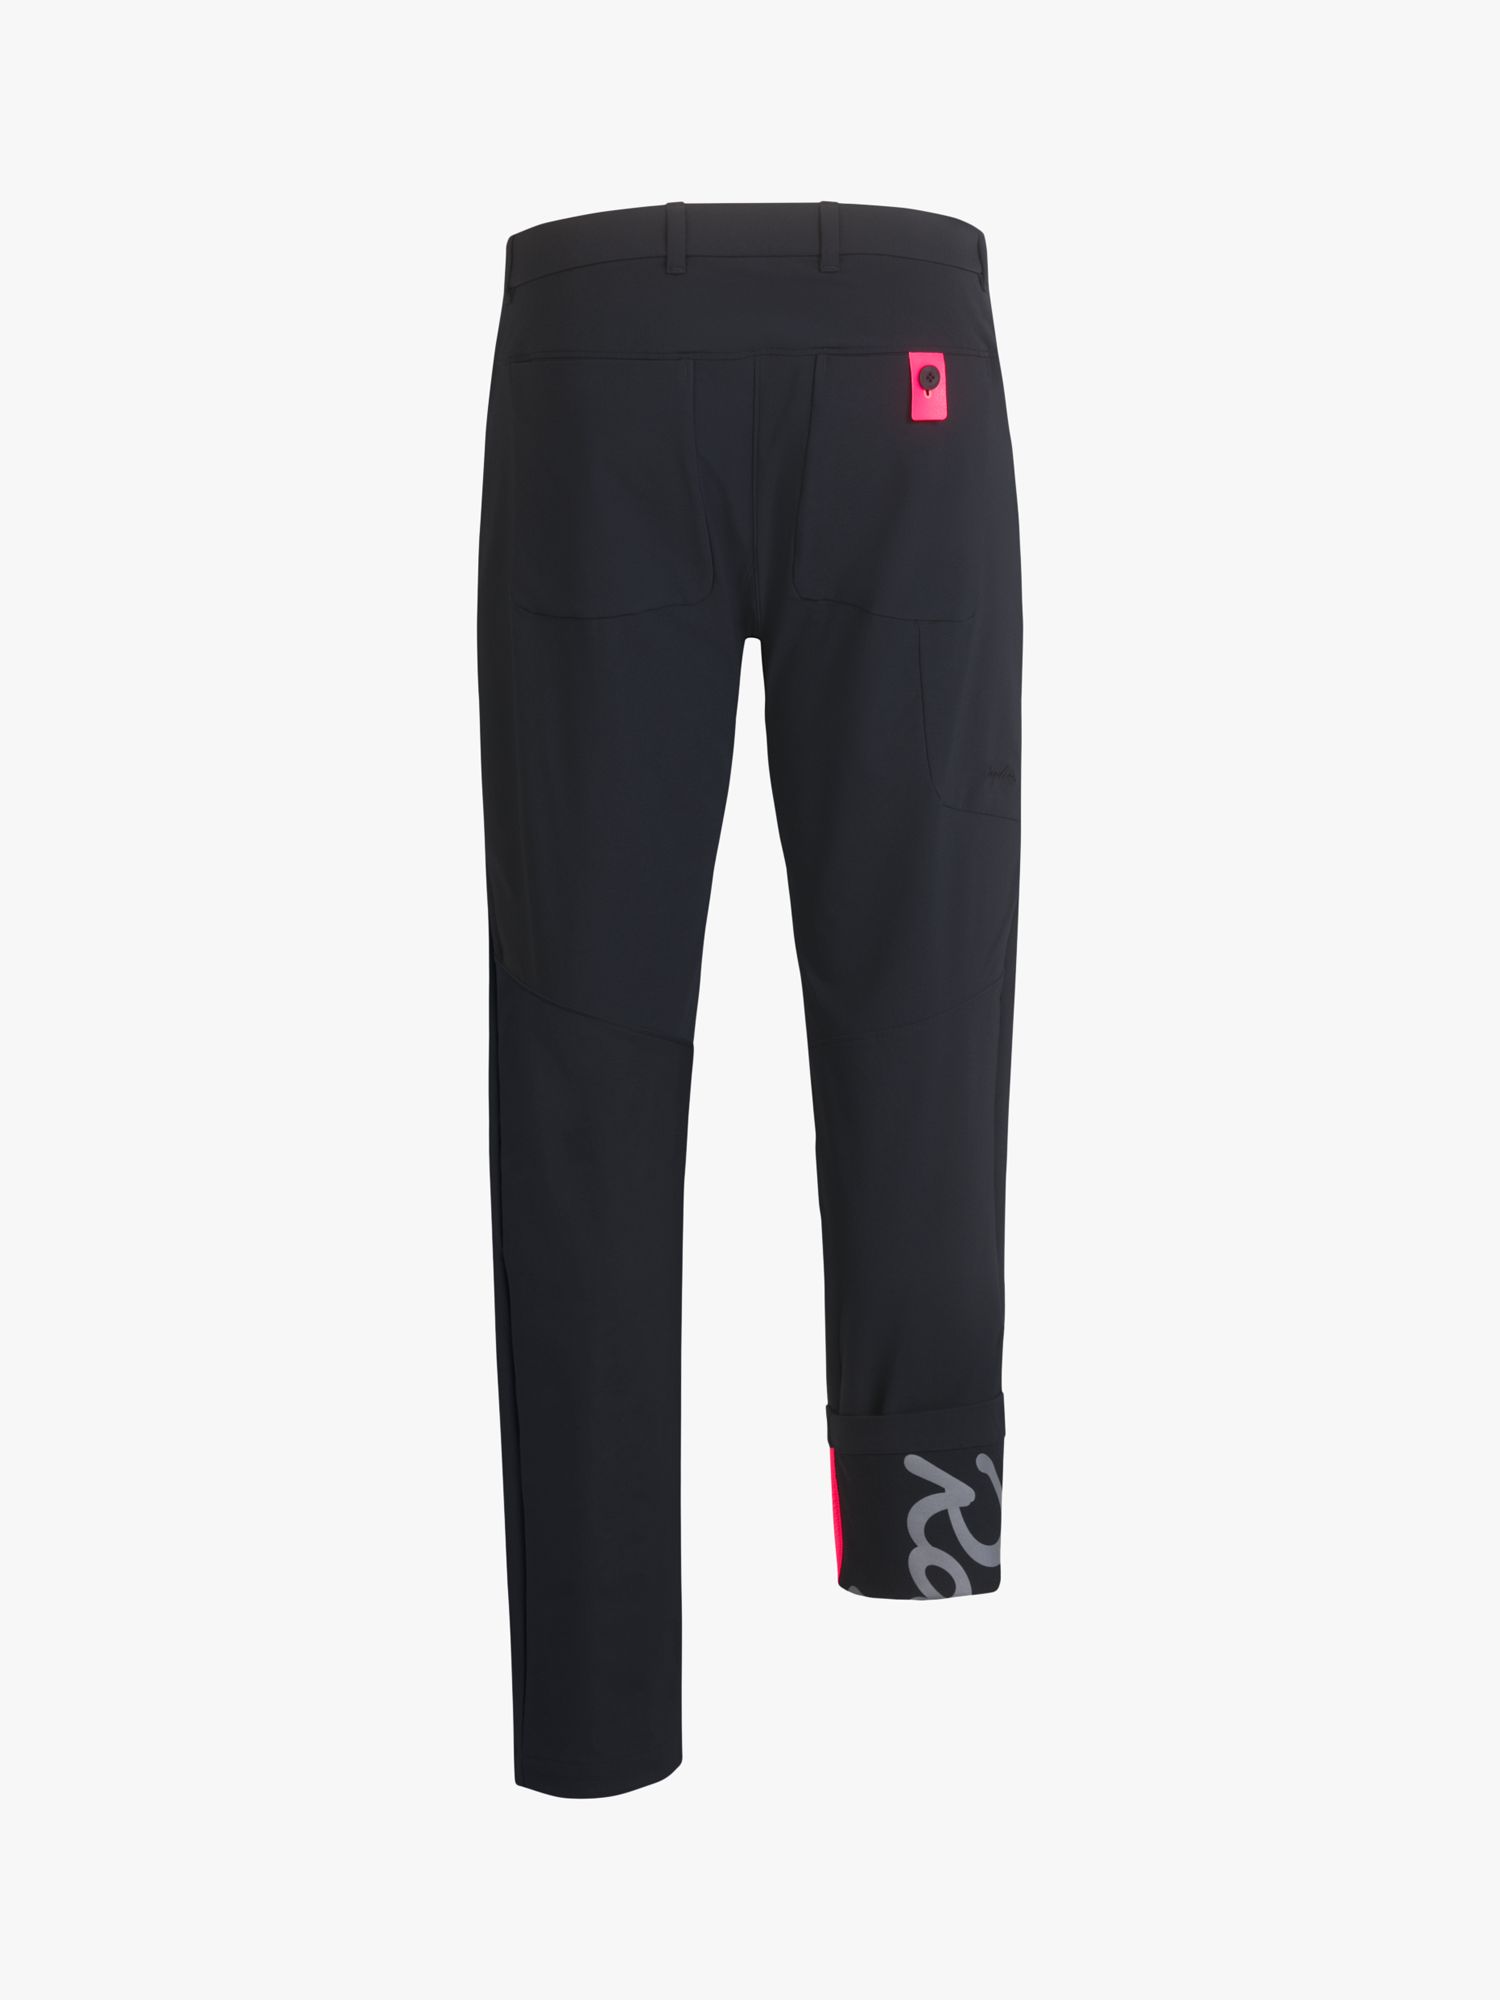 Rapha Technical Cycling Trousers, Black, S